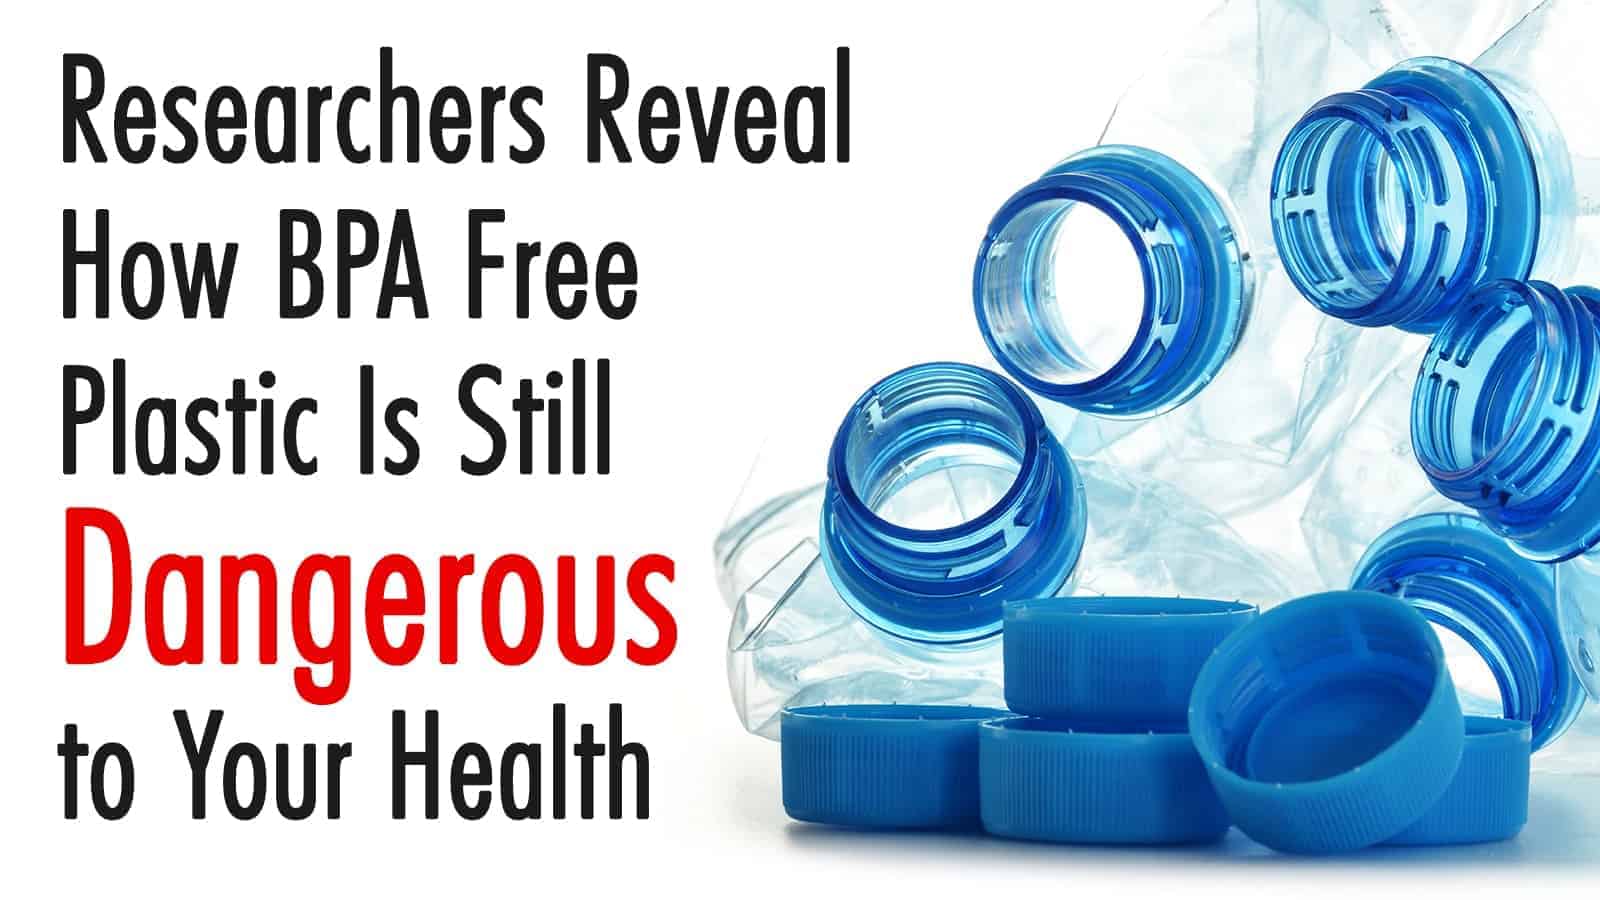 Researchers Reveal How BPA Free Plastic Is Still Dangerous to Your Health